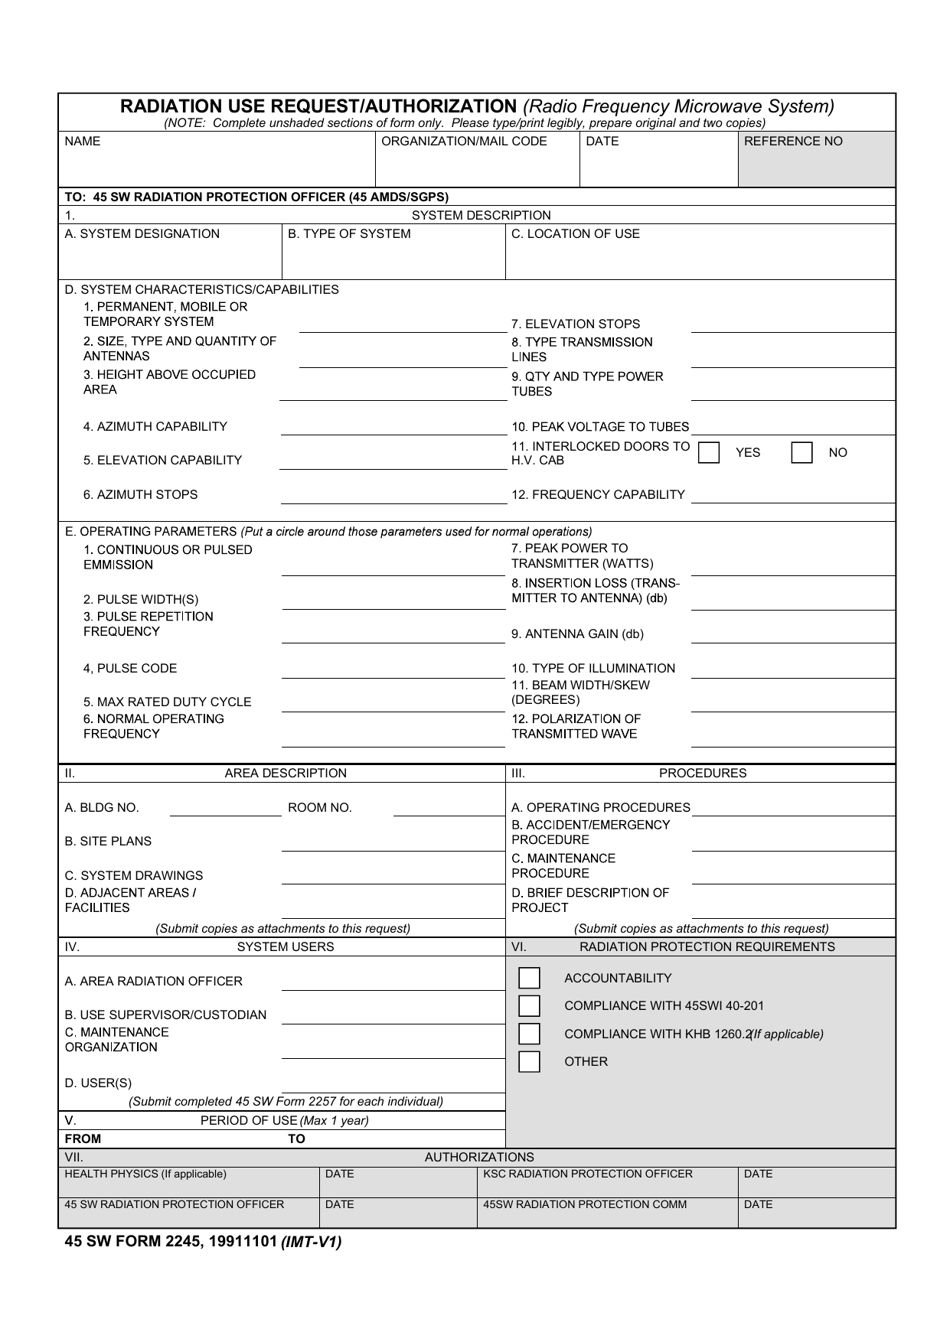 45 SW Form 2245 Radiation Use Request/Authorization(Radio Frequency Microwave System), Page 1